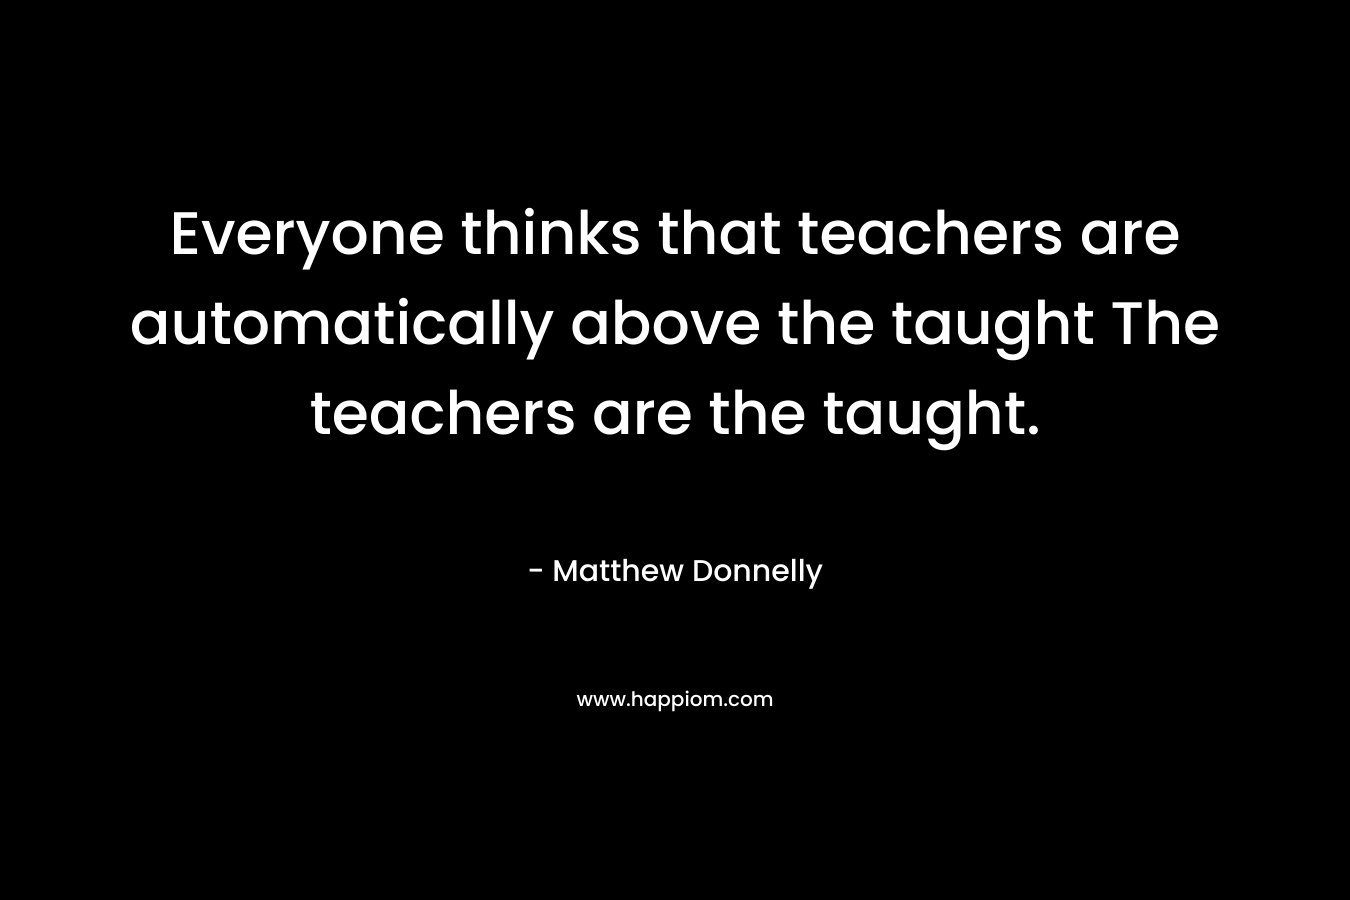 Everyone thinks that teachers are automatically above the taught The teachers are the taught.